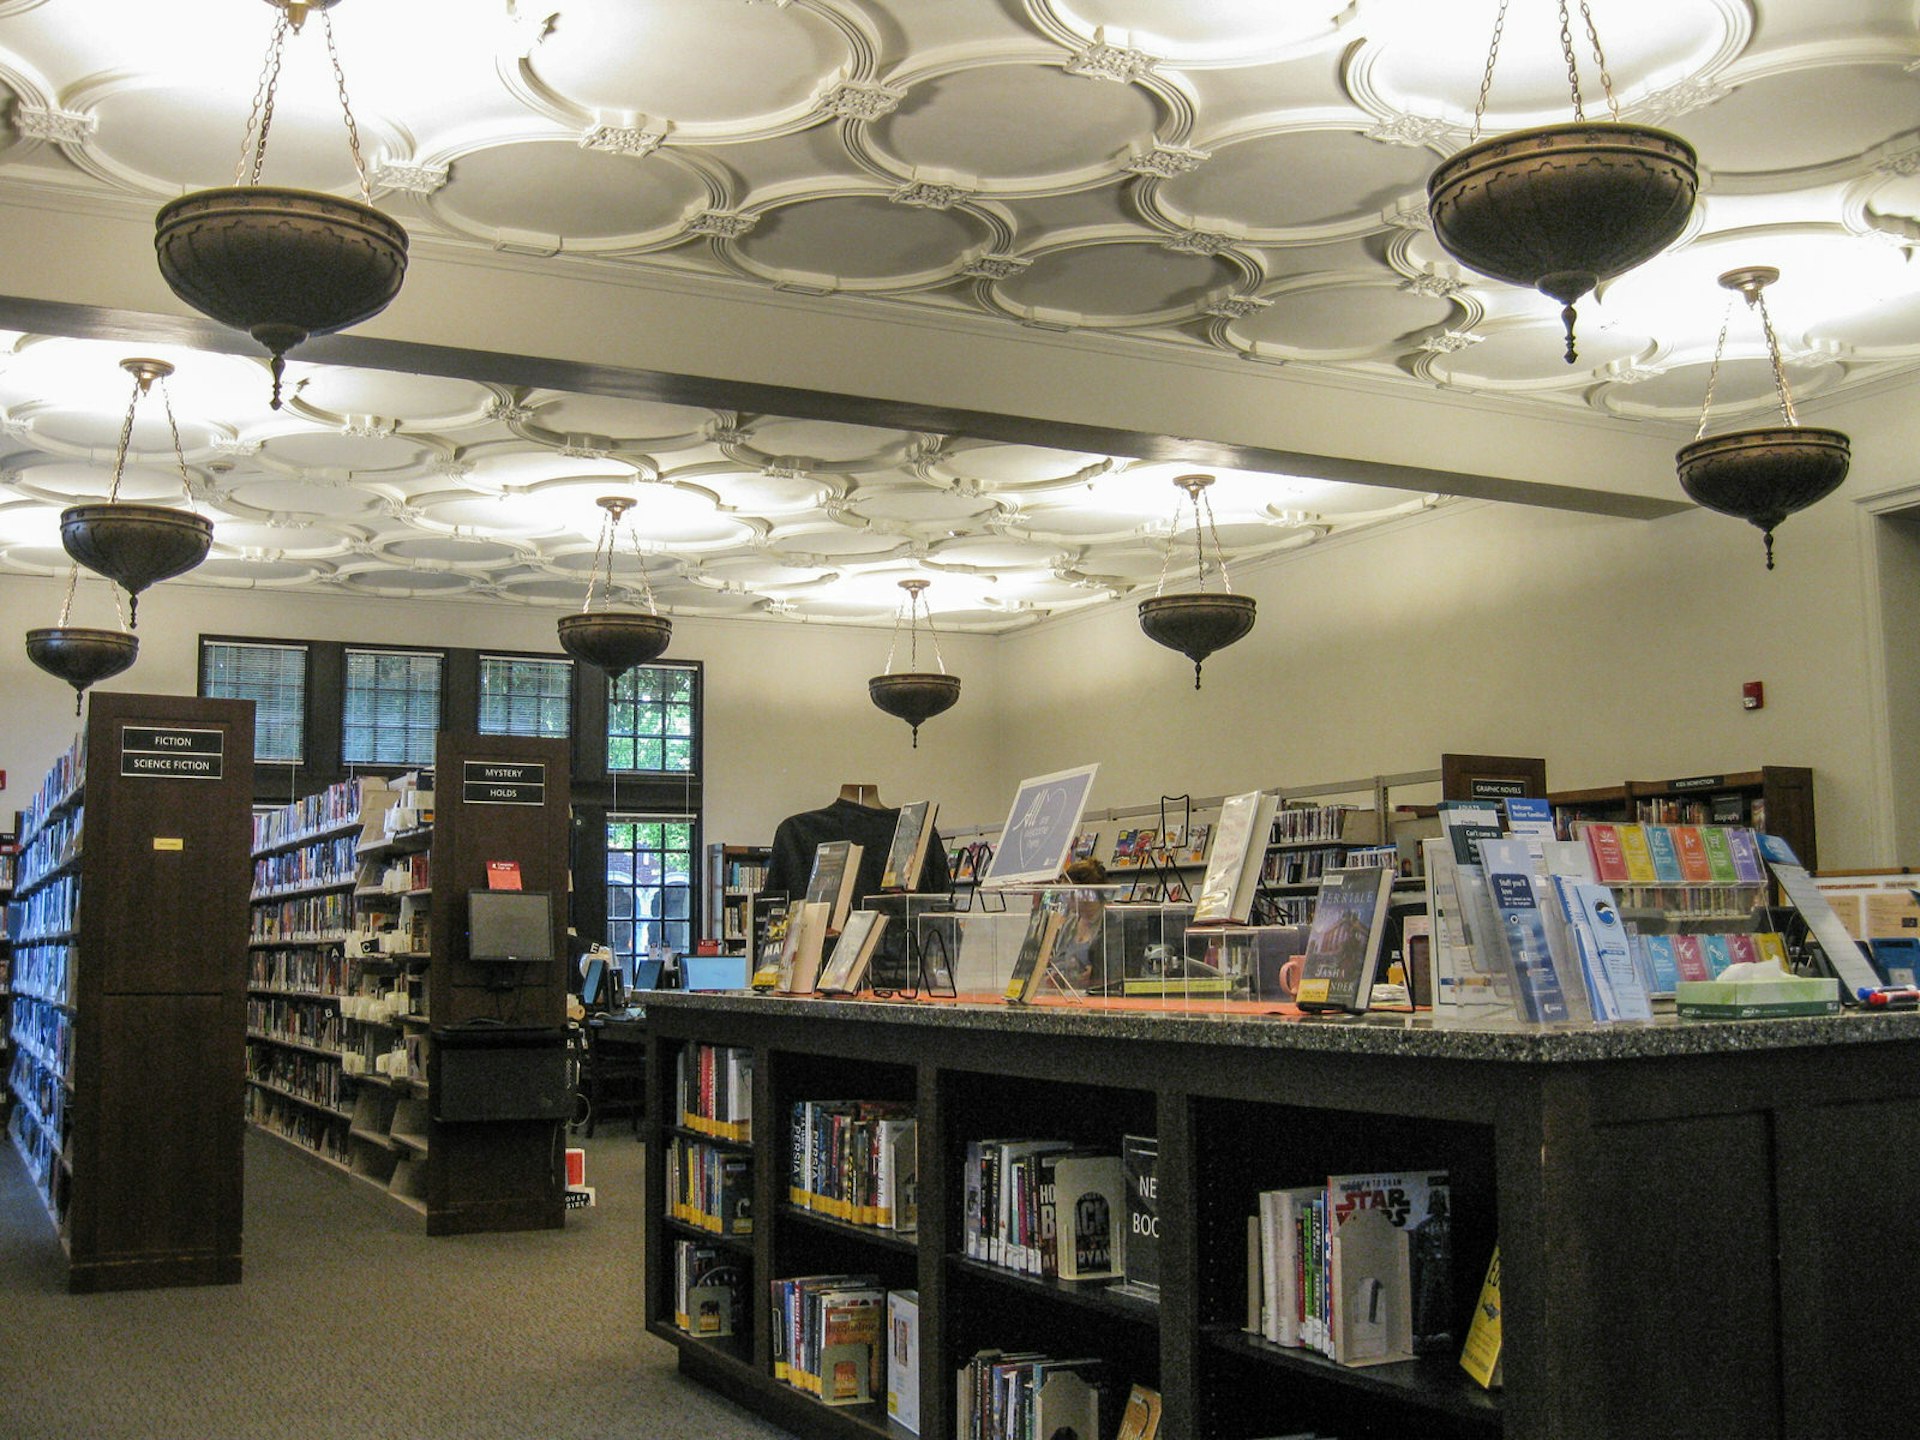 The interior of the Multnomah County Library, with bookshelves and long windows in the background, looking out over a central desk.